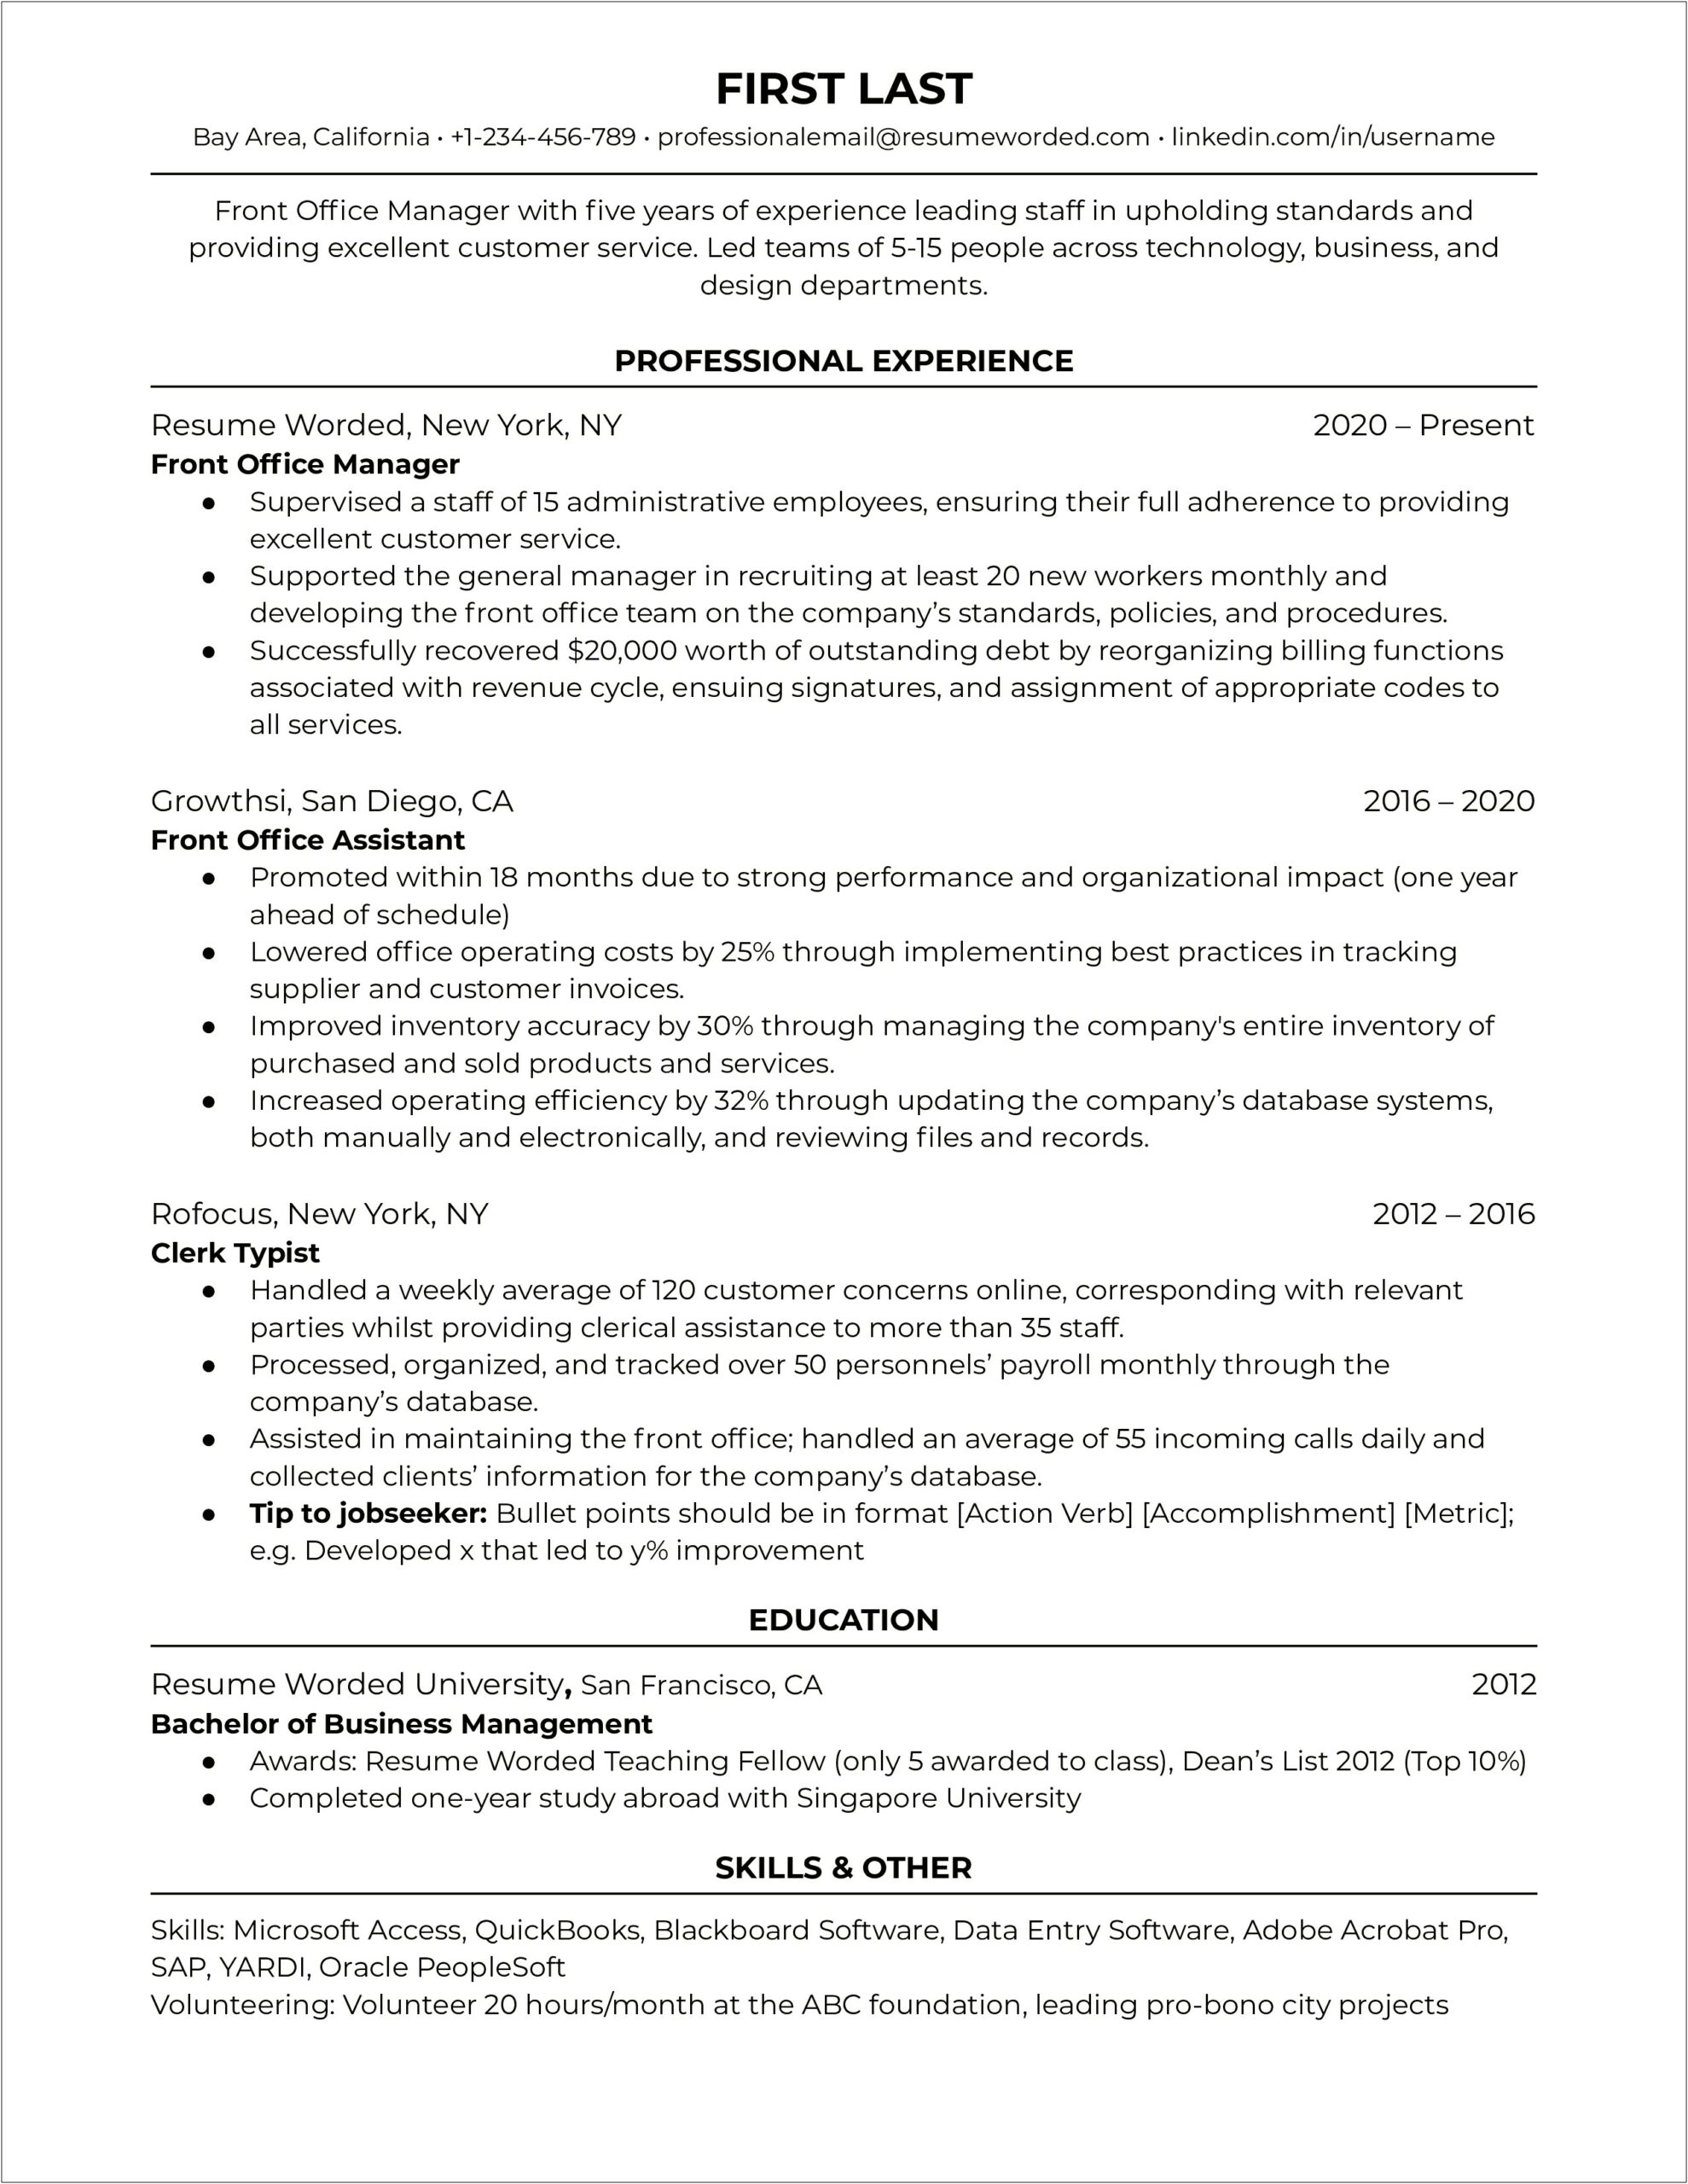 Resume Summary Examples Business Management